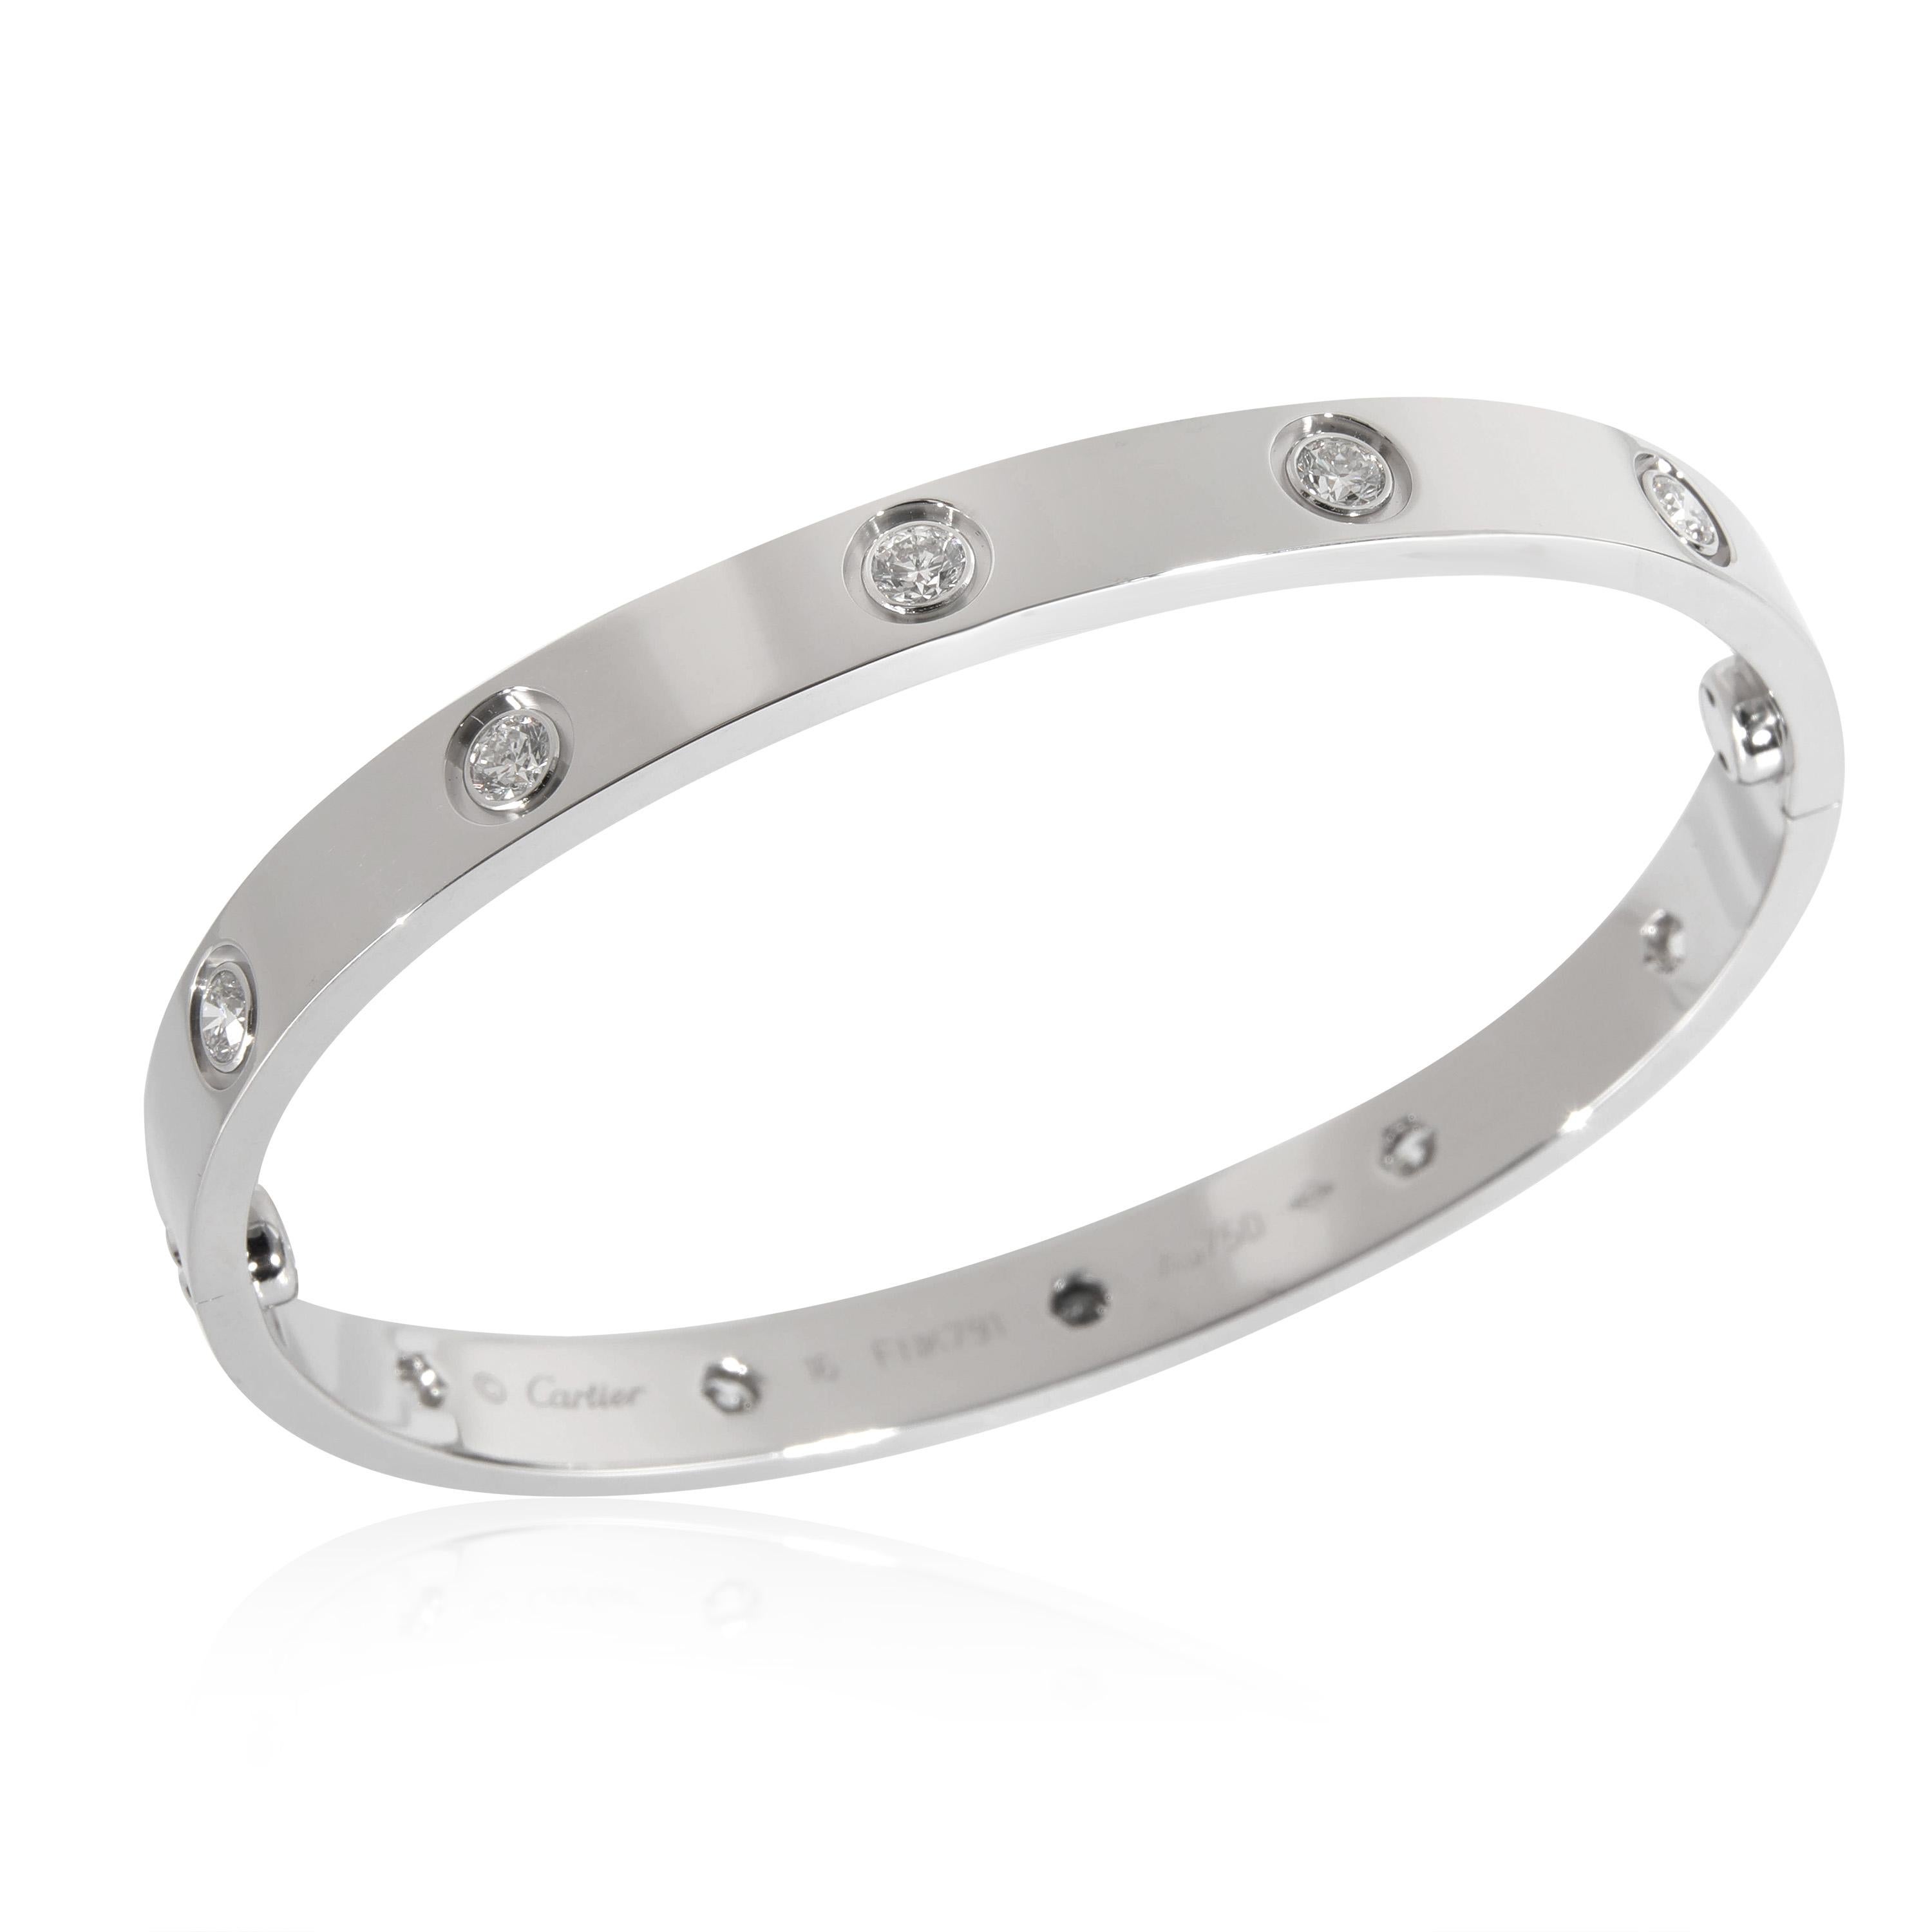 Cartier Love Diamond Bracelet in 18k White Gold 0.96 CTW

PRIMARY DETAILS
SKU: 131539
Listing Title: Cartier Love Diamond Bracelet in 18k White Gold 0.96 CTW
Condition Description: Cartier's Love collection is the epitome of iconic, from the